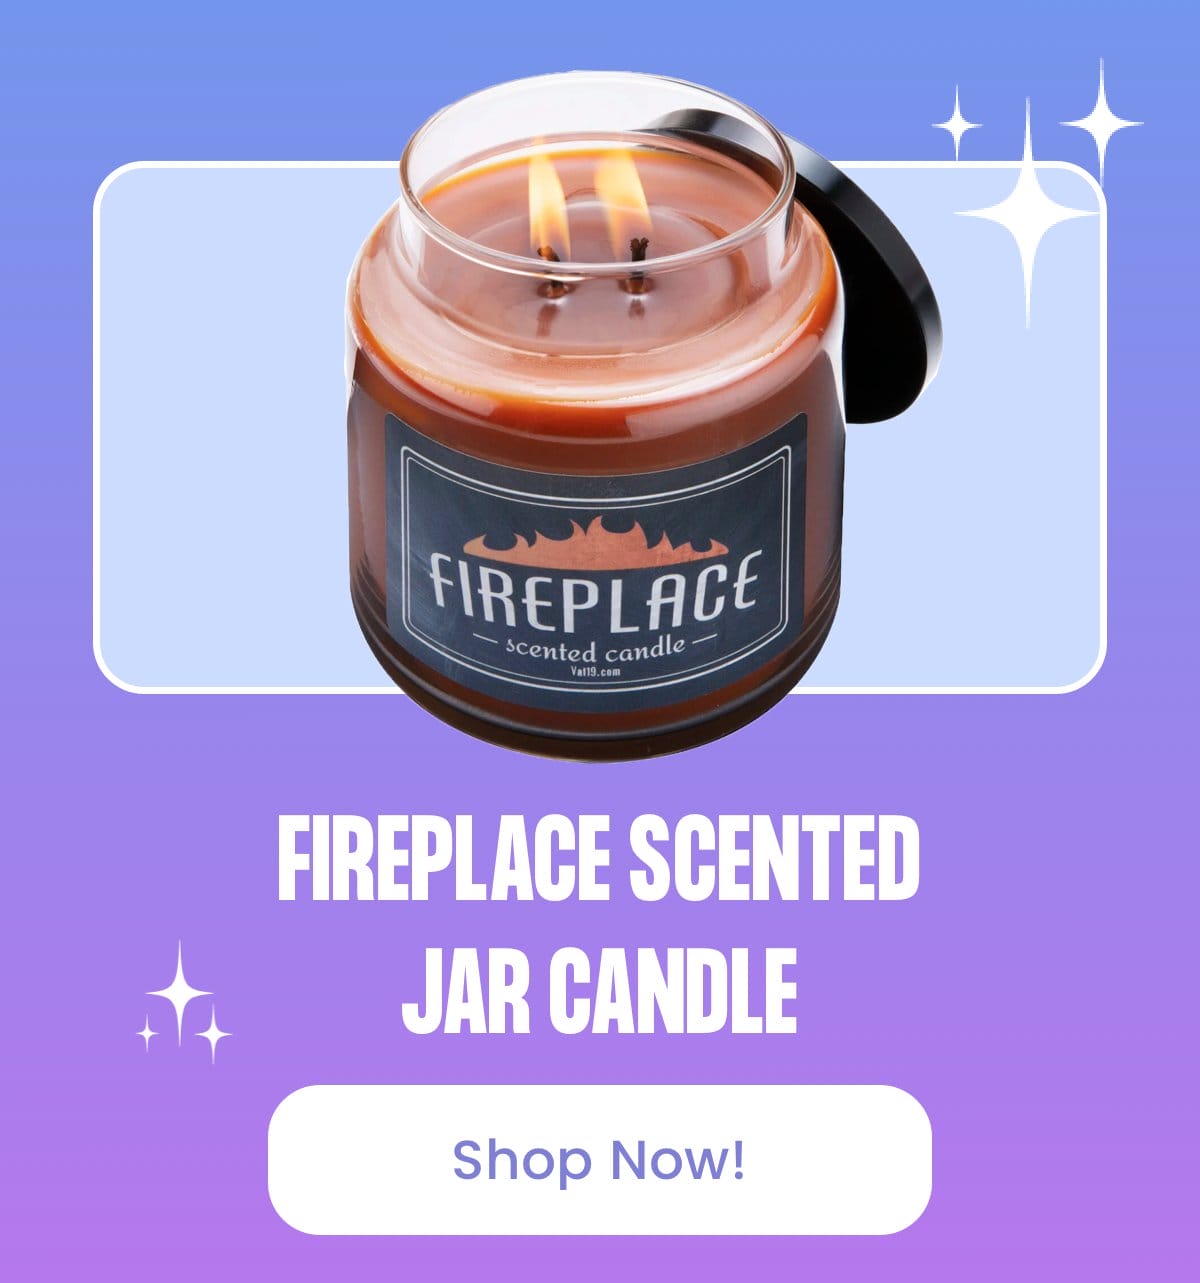 Fireplace Scented Jar Candle